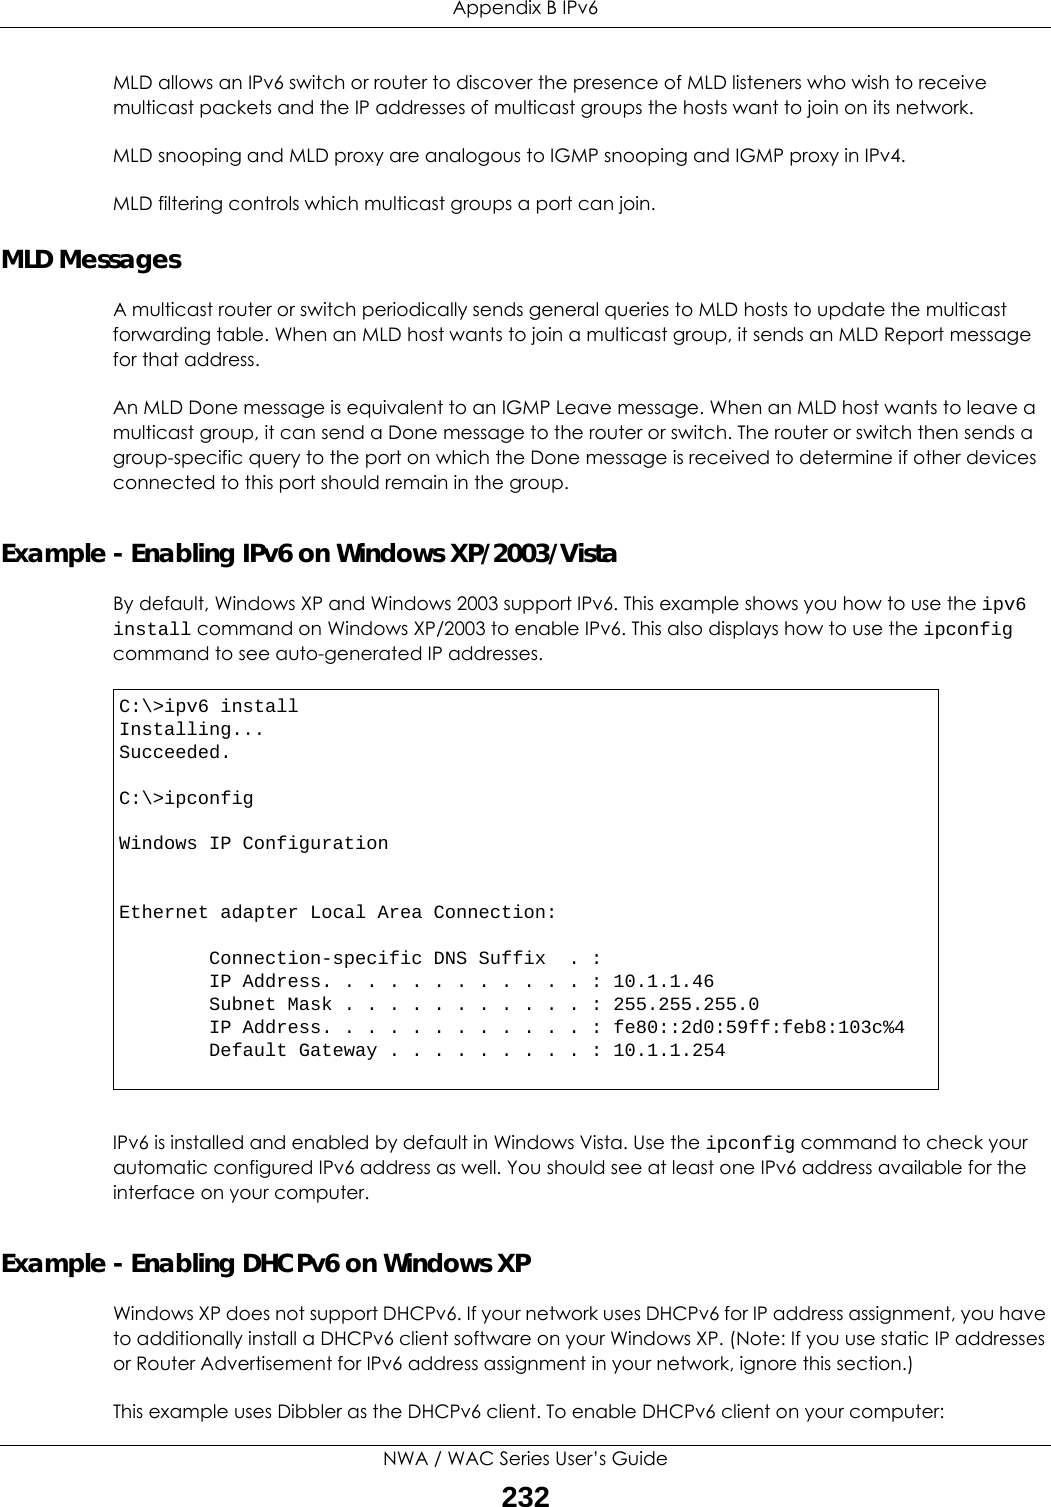 Appendix B IPv6NWA / WAC Series User’s Guide232MLD allows an IPv6 switch or router to discover the presence of MLD listeners who wish to receive multicast packets and the IP addresses of multicast groups the hosts want to join on its network.  MLD snooping and MLD proxy are analogous to IGMP snooping and IGMP proxy in IPv4. MLD filtering controls which multicast groups a port can join.MLD MessagesA multicast router or switch periodically sends general queries to MLD hosts to update the multicast forwarding table. When an MLD host wants to join a multicast group, it sends an MLD Report message for that address.An MLD Done message is equivalent to an IGMP Leave message. When an MLD host wants to leave a multicast group, it can send a Done message to the router or switch. The router or switch then sends a group-specific query to the port on which the Done message is received to determine if other devices connected to this port should remain in the group.Example - Enabling IPv6 on Windows XP/2003/VistaBy default, Windows XP and Windows 2003 support IPv6. This example shows you how to use the ipv6 install command on Windows XP/2003 to enable IPv6. This also displays how to use the ipconfig command to see auto-generated IP addresses.IPv6 is installed and enabled by default in Windows Vista. Use the ipconfig command to check your automatic configured IPv6 address as well. You should see at least one IPv6 address available for the interface on your computer.Example - Enabling DHCPv6 on Windows XPWindows XP does not support DHCPv6. If your network uses DHCPv6 for IP address assignment, you have to additionally install a DHCPv6 client software on your Windows XP. (Note: If you use static IP addresses or Router Advertisement for IPv6 address assignment in your network, ignore this section.)This example uses Dibbler as the DHCPv6 client. To enable DHCPv6 client on your computer:C:\&gt;ipv6 installInstalling...Succeeded.C:\&gt;ipconfigWindows IP ConfigurationEthernet adapter Local Area Connection:        Connection-specific DNS Suffix  . :         IP Address. . . . . . . . . . . . : 10.1.1.46        Subnet Mask . . . . . . . . . . . : 255.255.255.0        IP Address. . . . . . . . . . . . : fe80::2d0:59ff:feb8:103c%4        Default Gateway . . . . . . . . . : 10.1.1.254